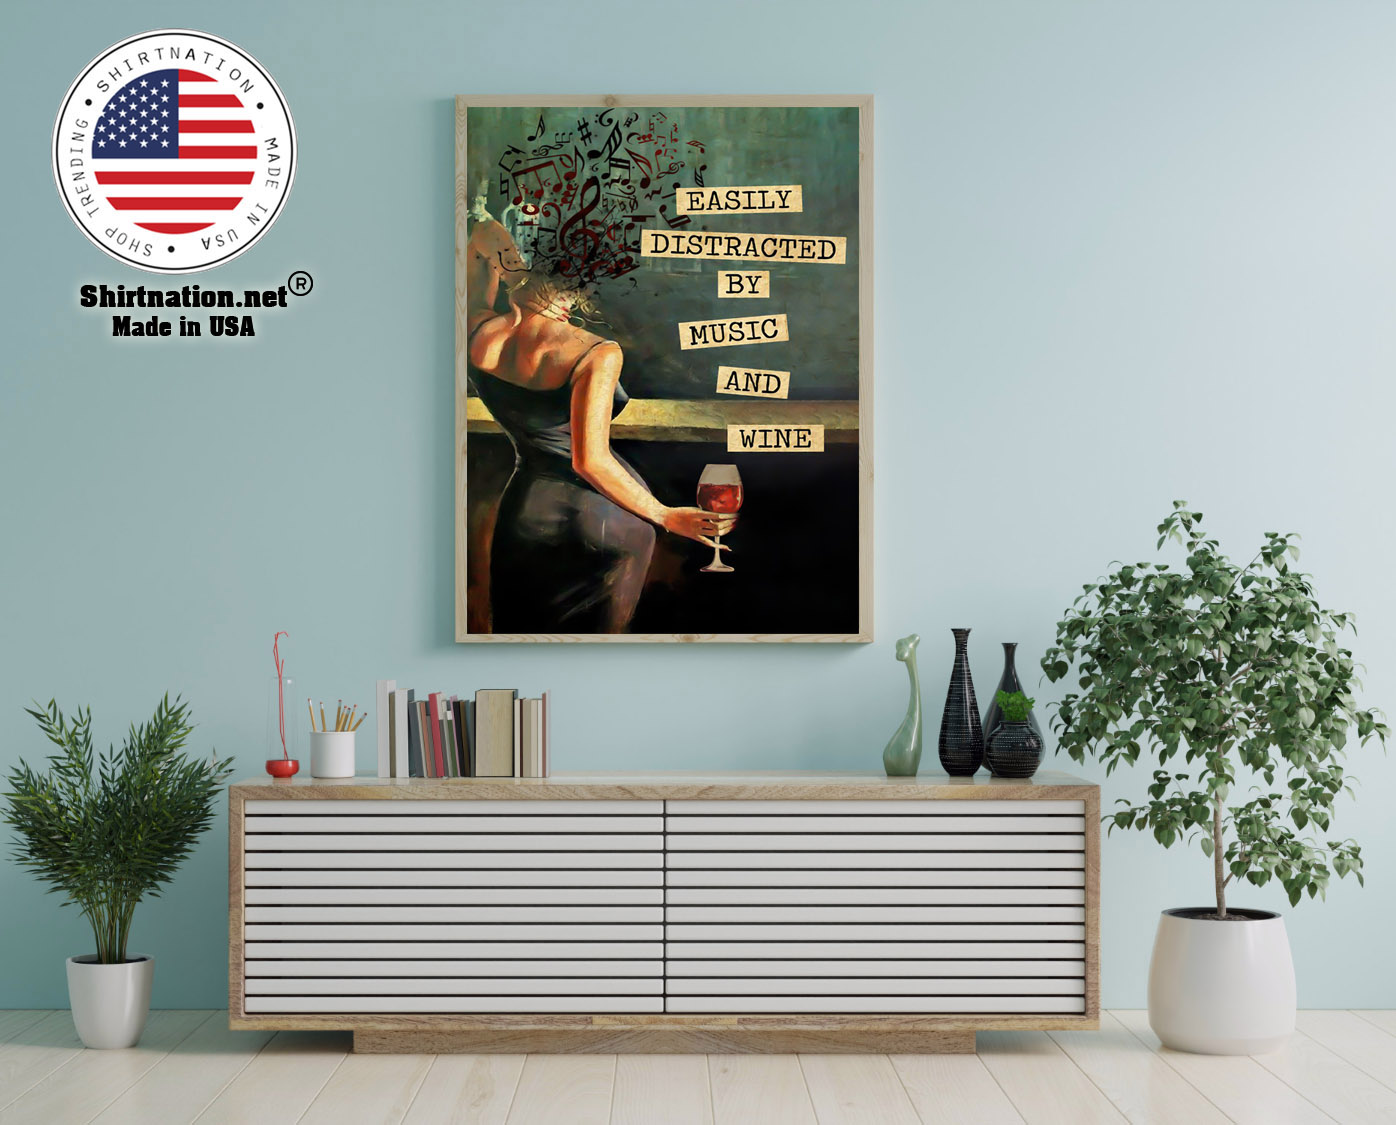 Vintage easily distracted by music and wine poster 12 1